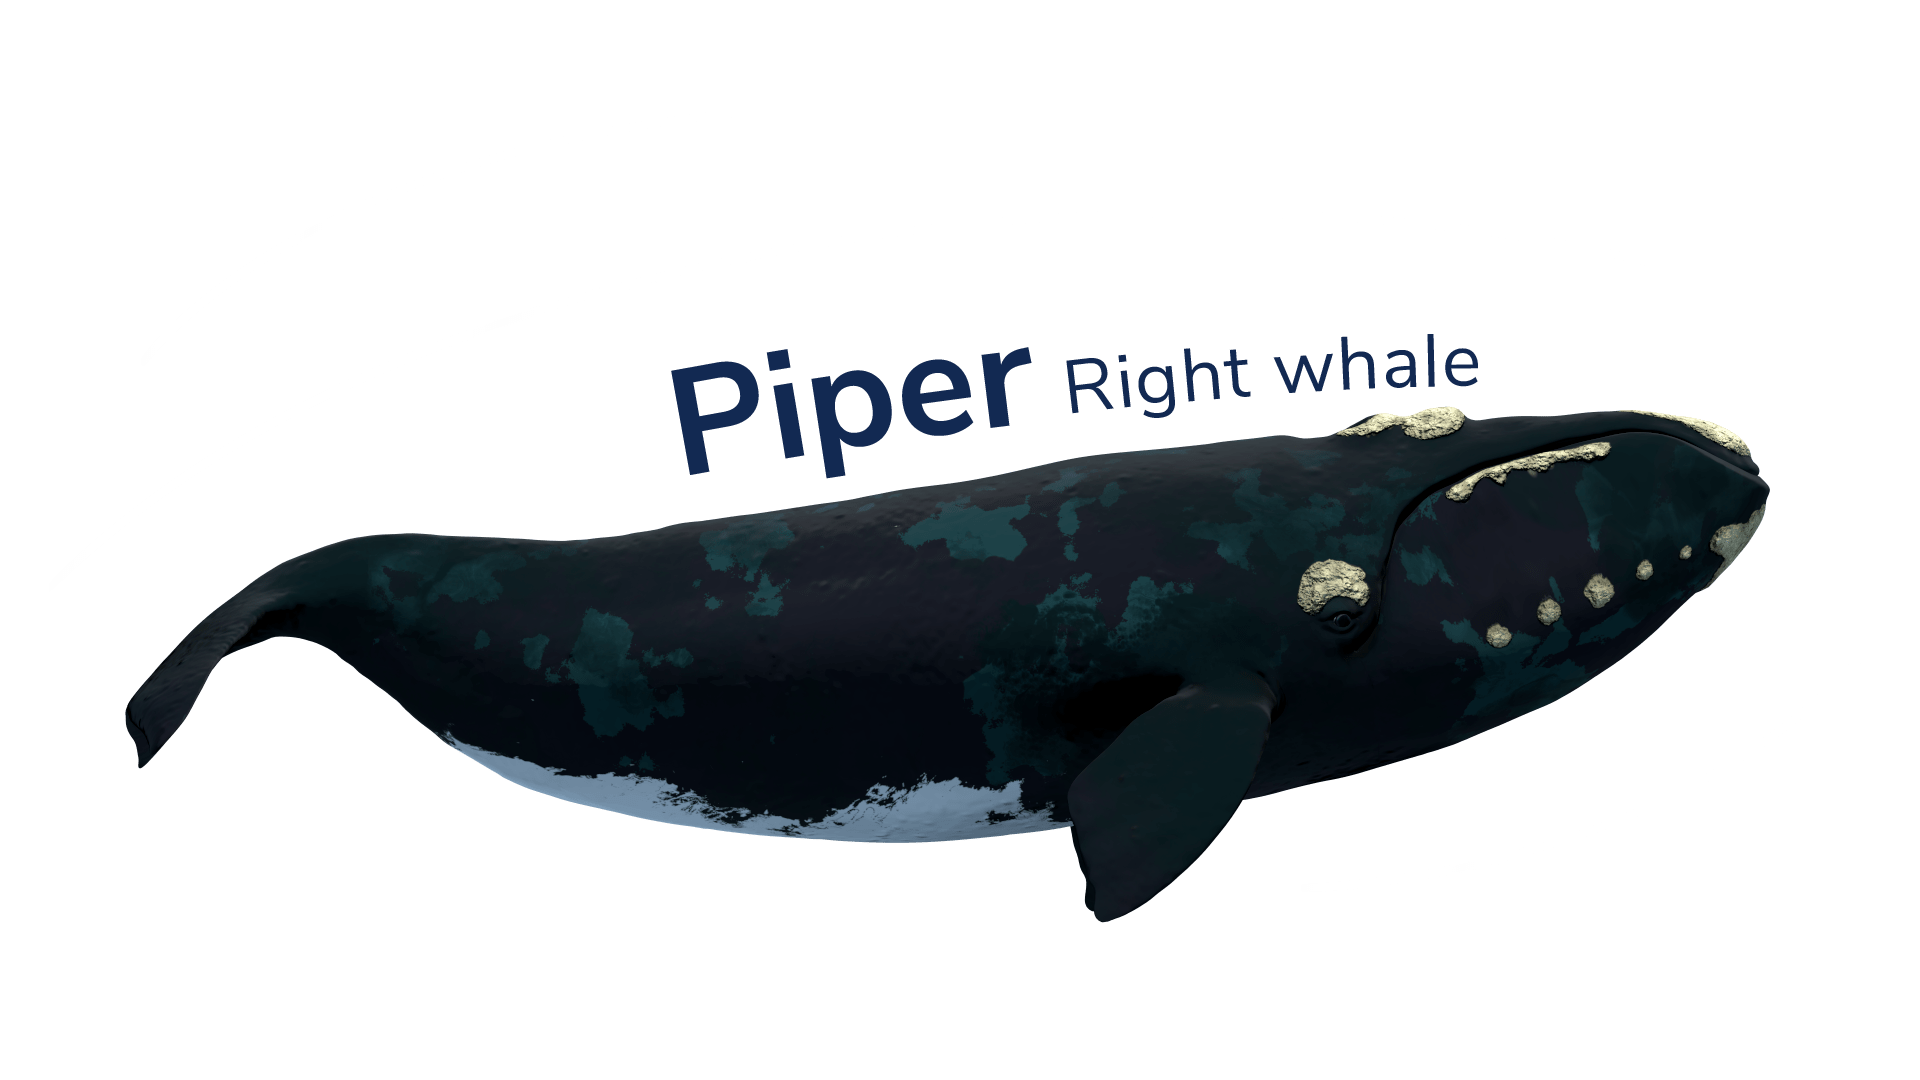 The right whale Piper